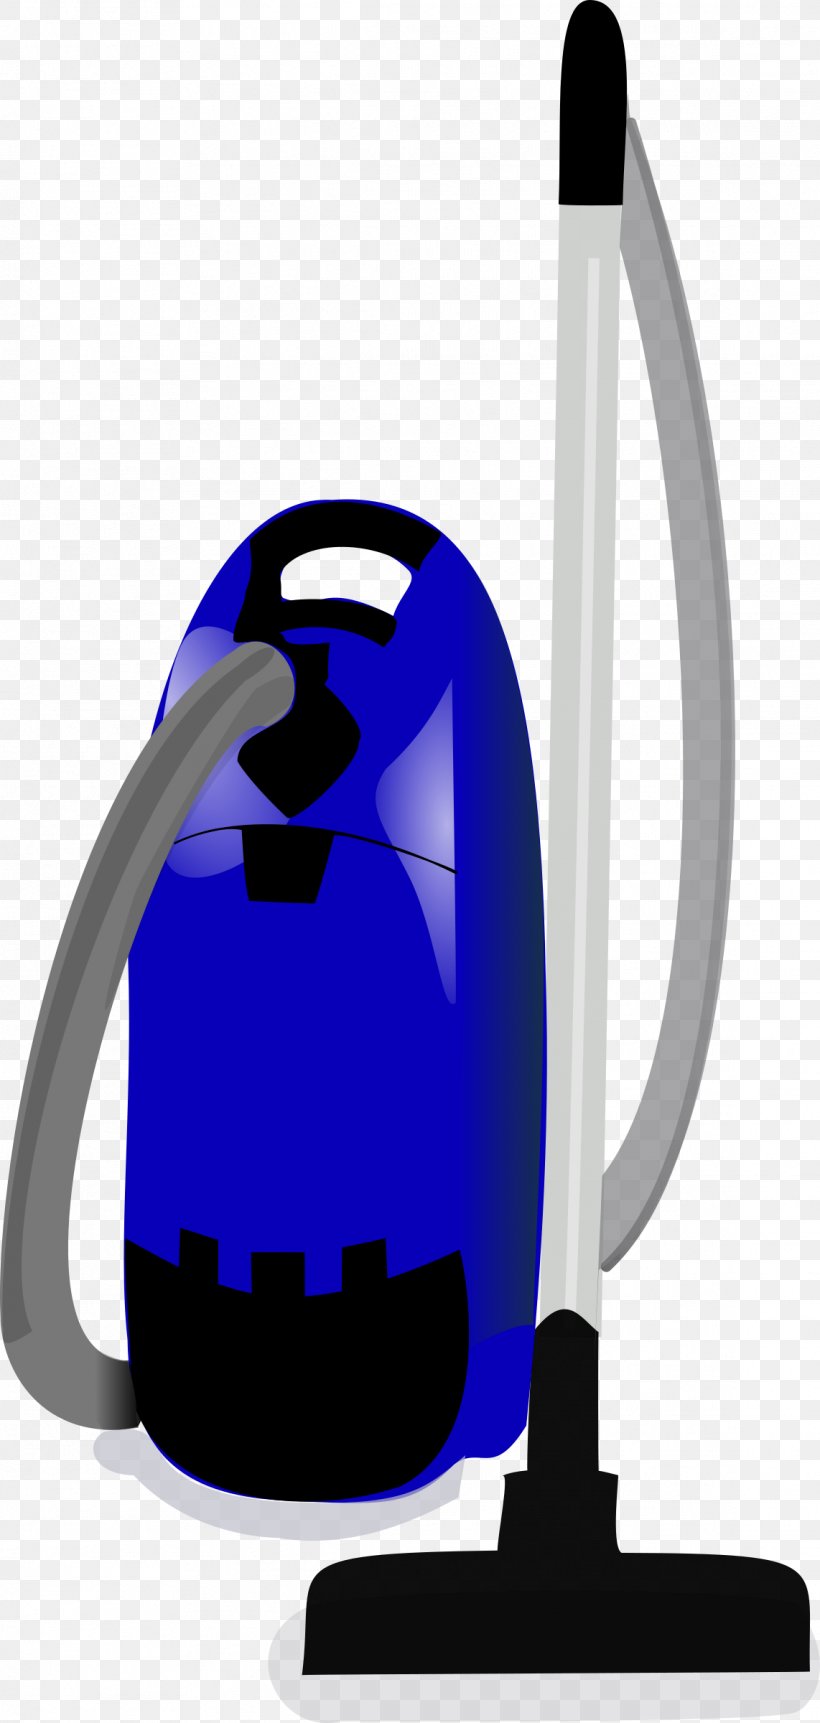 Vacuum Cleaner Cleaning Clip Art, PNG, 1142x2400px, Vacuum Cleaner, Carpet, Carpet Cleaning, Cleaner, Cleaning Download Free